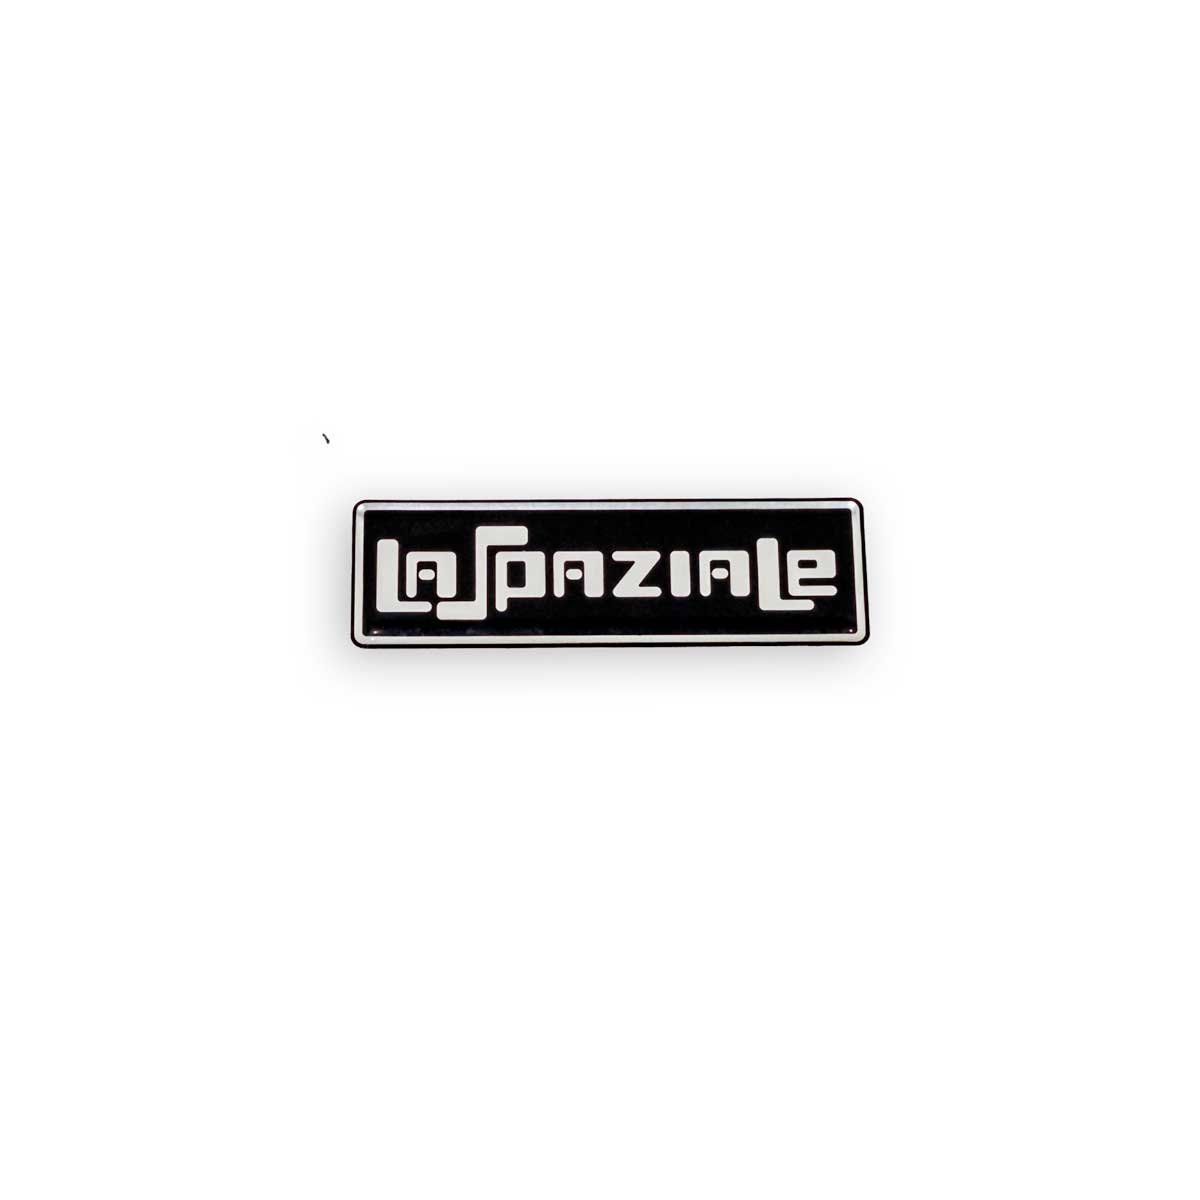 Spaziale Drip Tray Decals